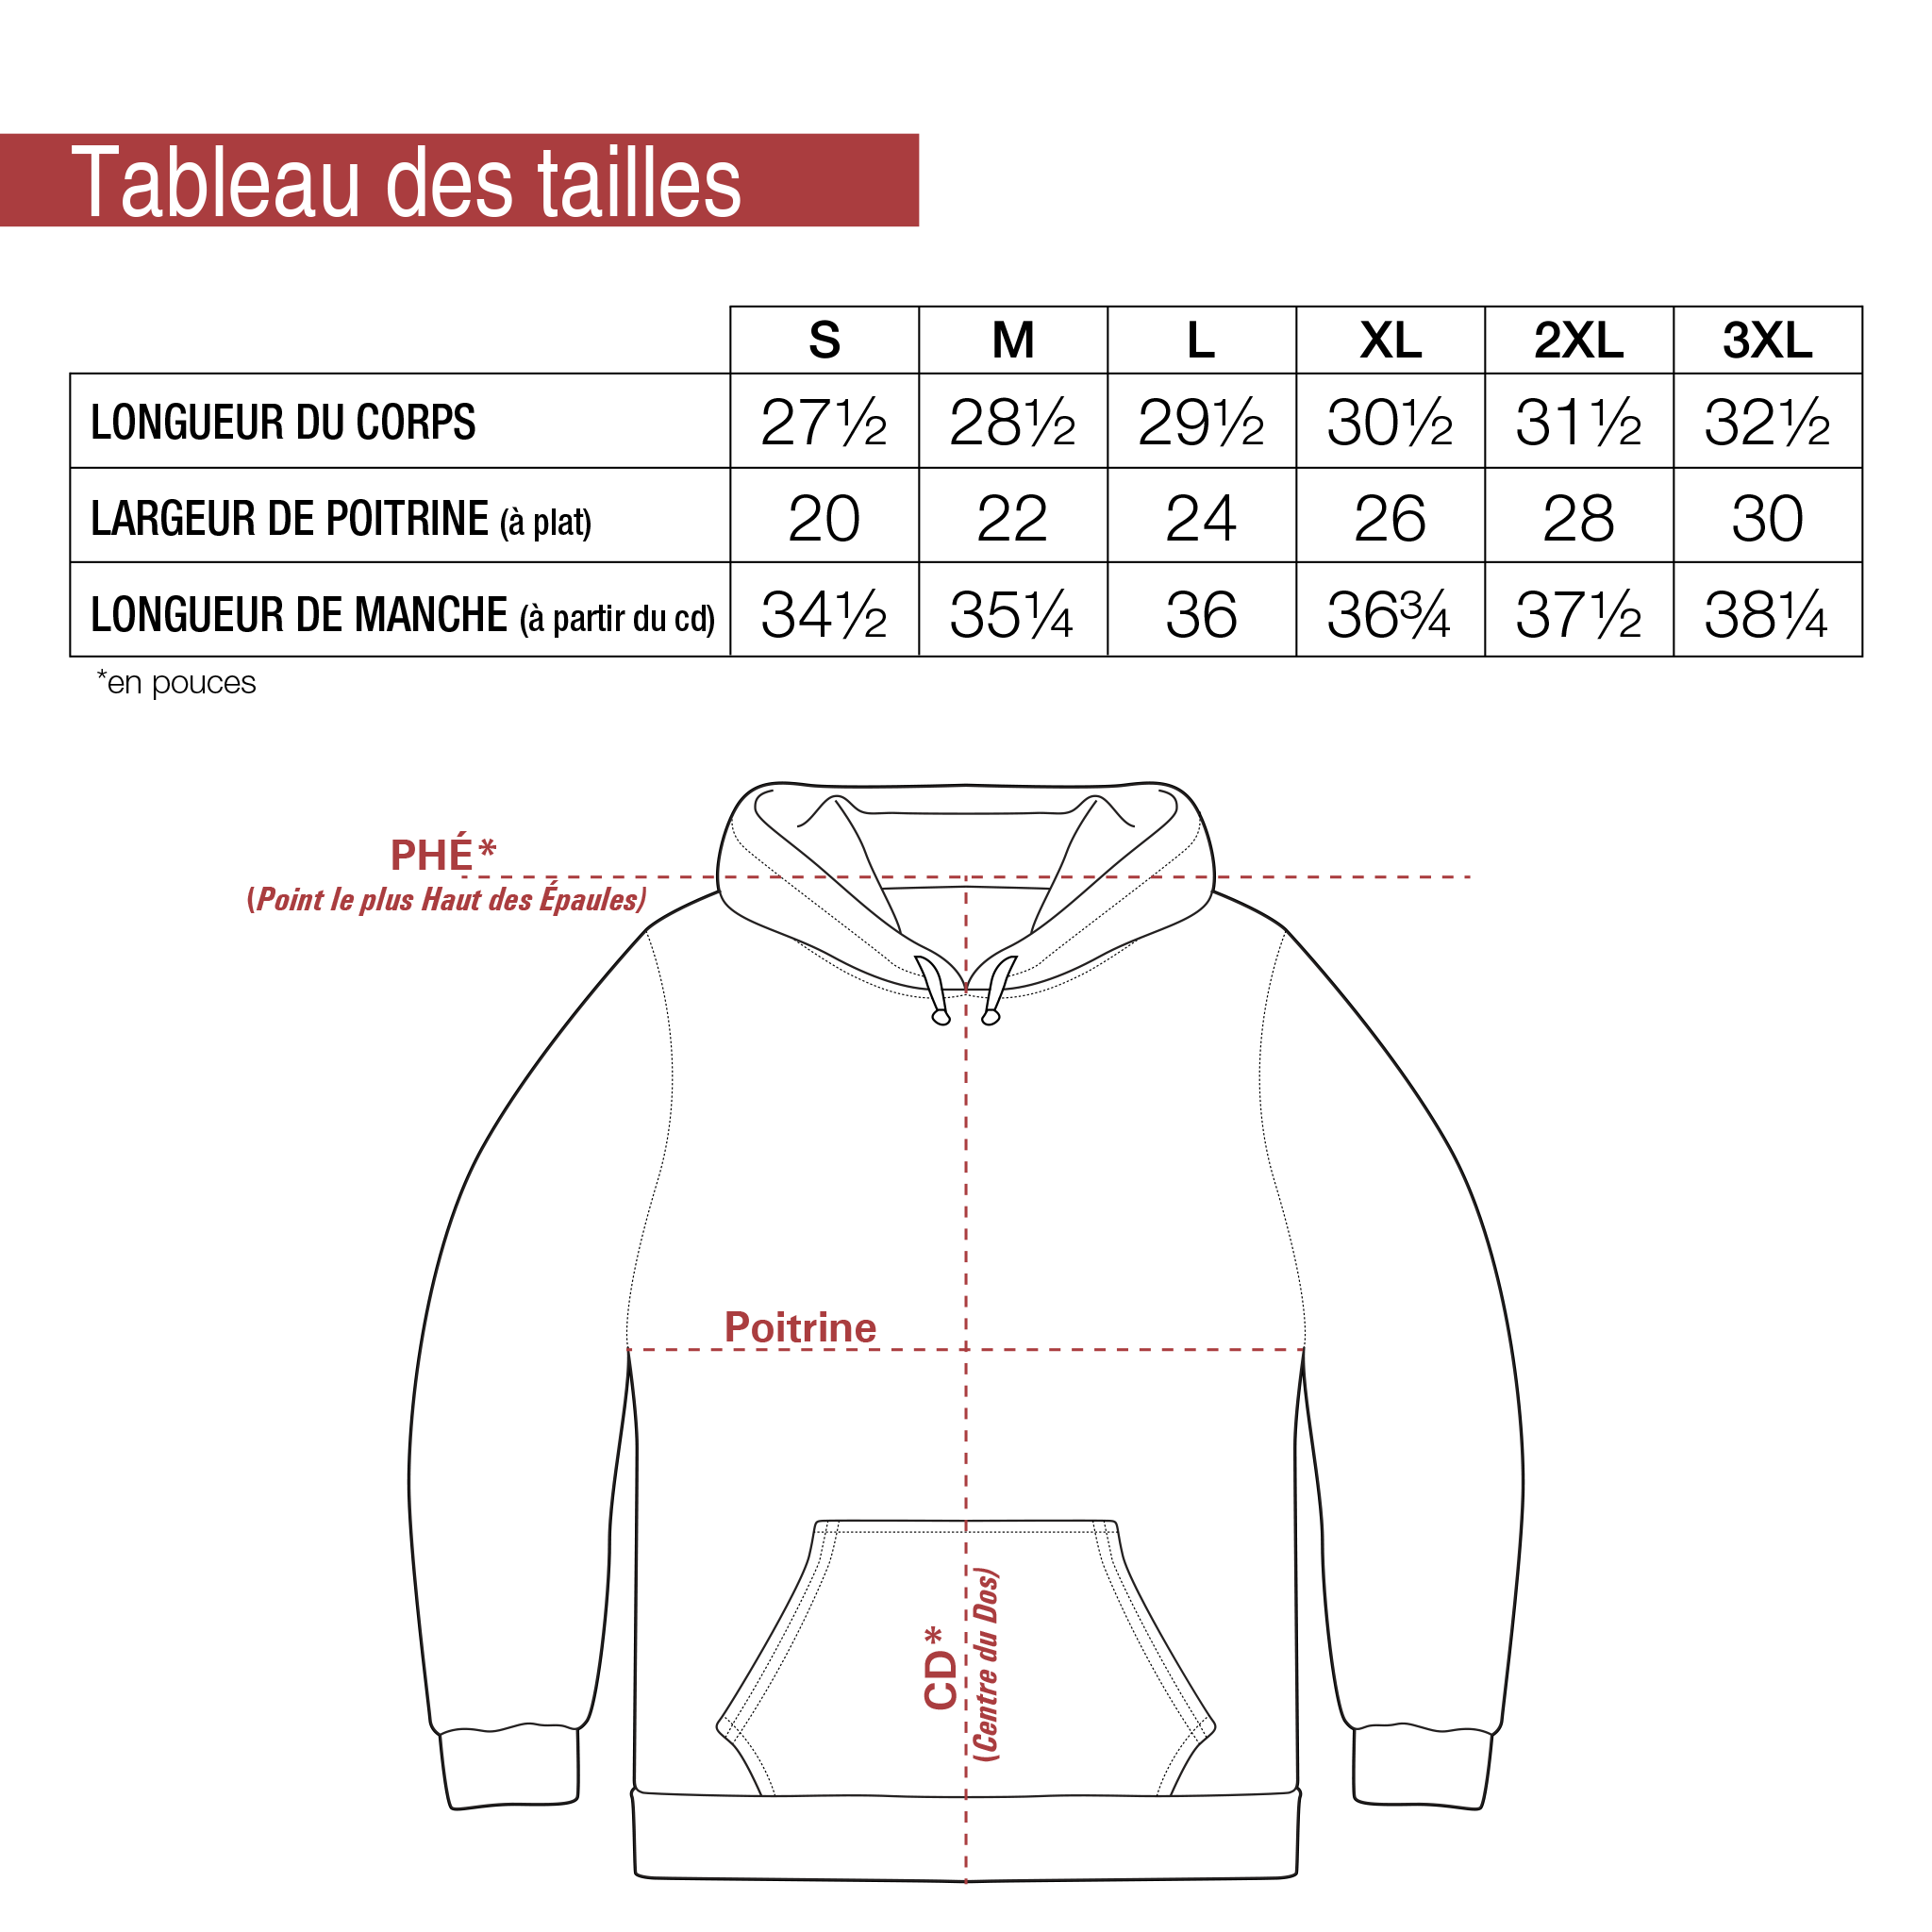 Tableau-taille-ATCF2500.png